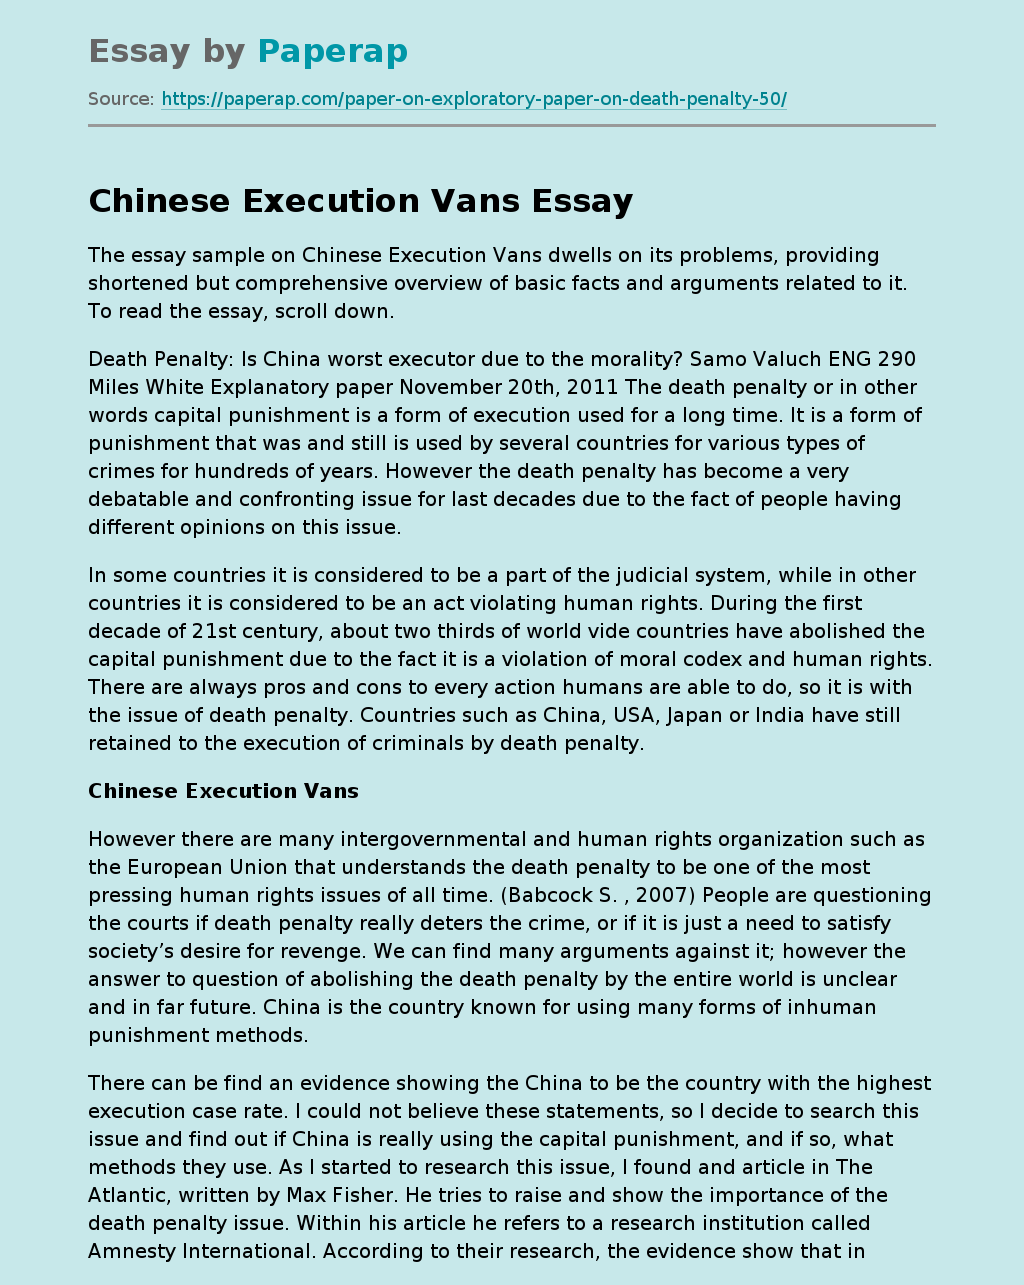 Chinese Execution Vans